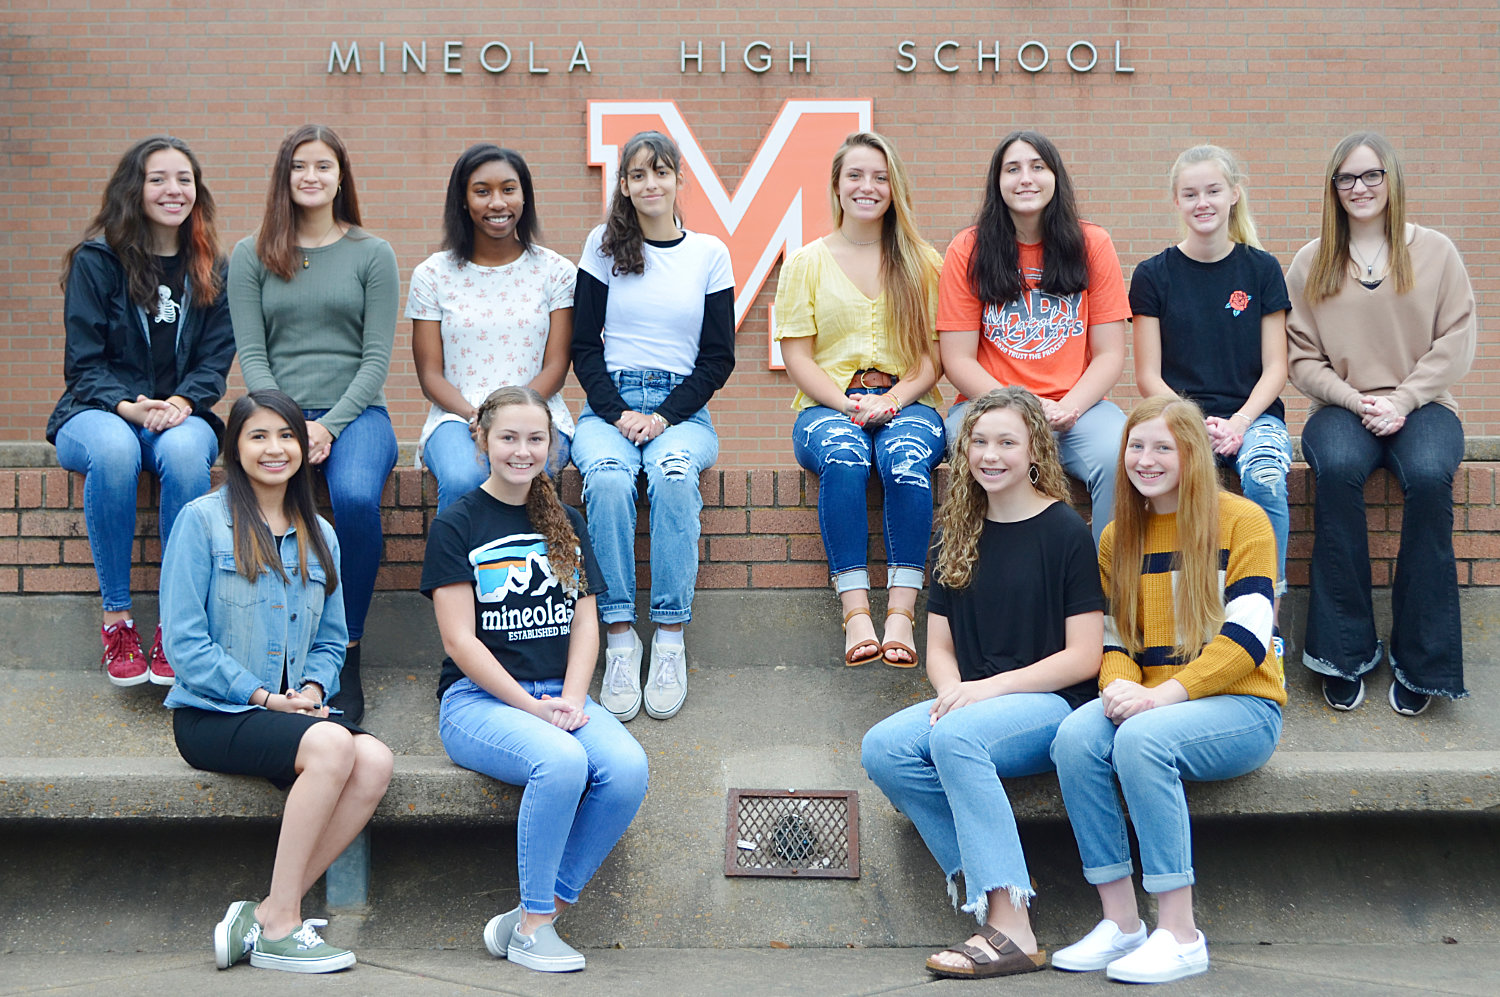 Mineola's 2020 homecoming court includes, back from left, queen nominees, seniors Camila Ramos and Melissa Rojas, juniors Tahjae Black and Olivia Toledo, sophomores Alyssa Lankford and Brittany Pickle and freshmen Toni Brannan and Caidyn Anderson. The duchesses include, front from left, senior Pricila Torres, junior Sunni Ruffin, sophomore Allison Hooton and freshman Macy Fischer.